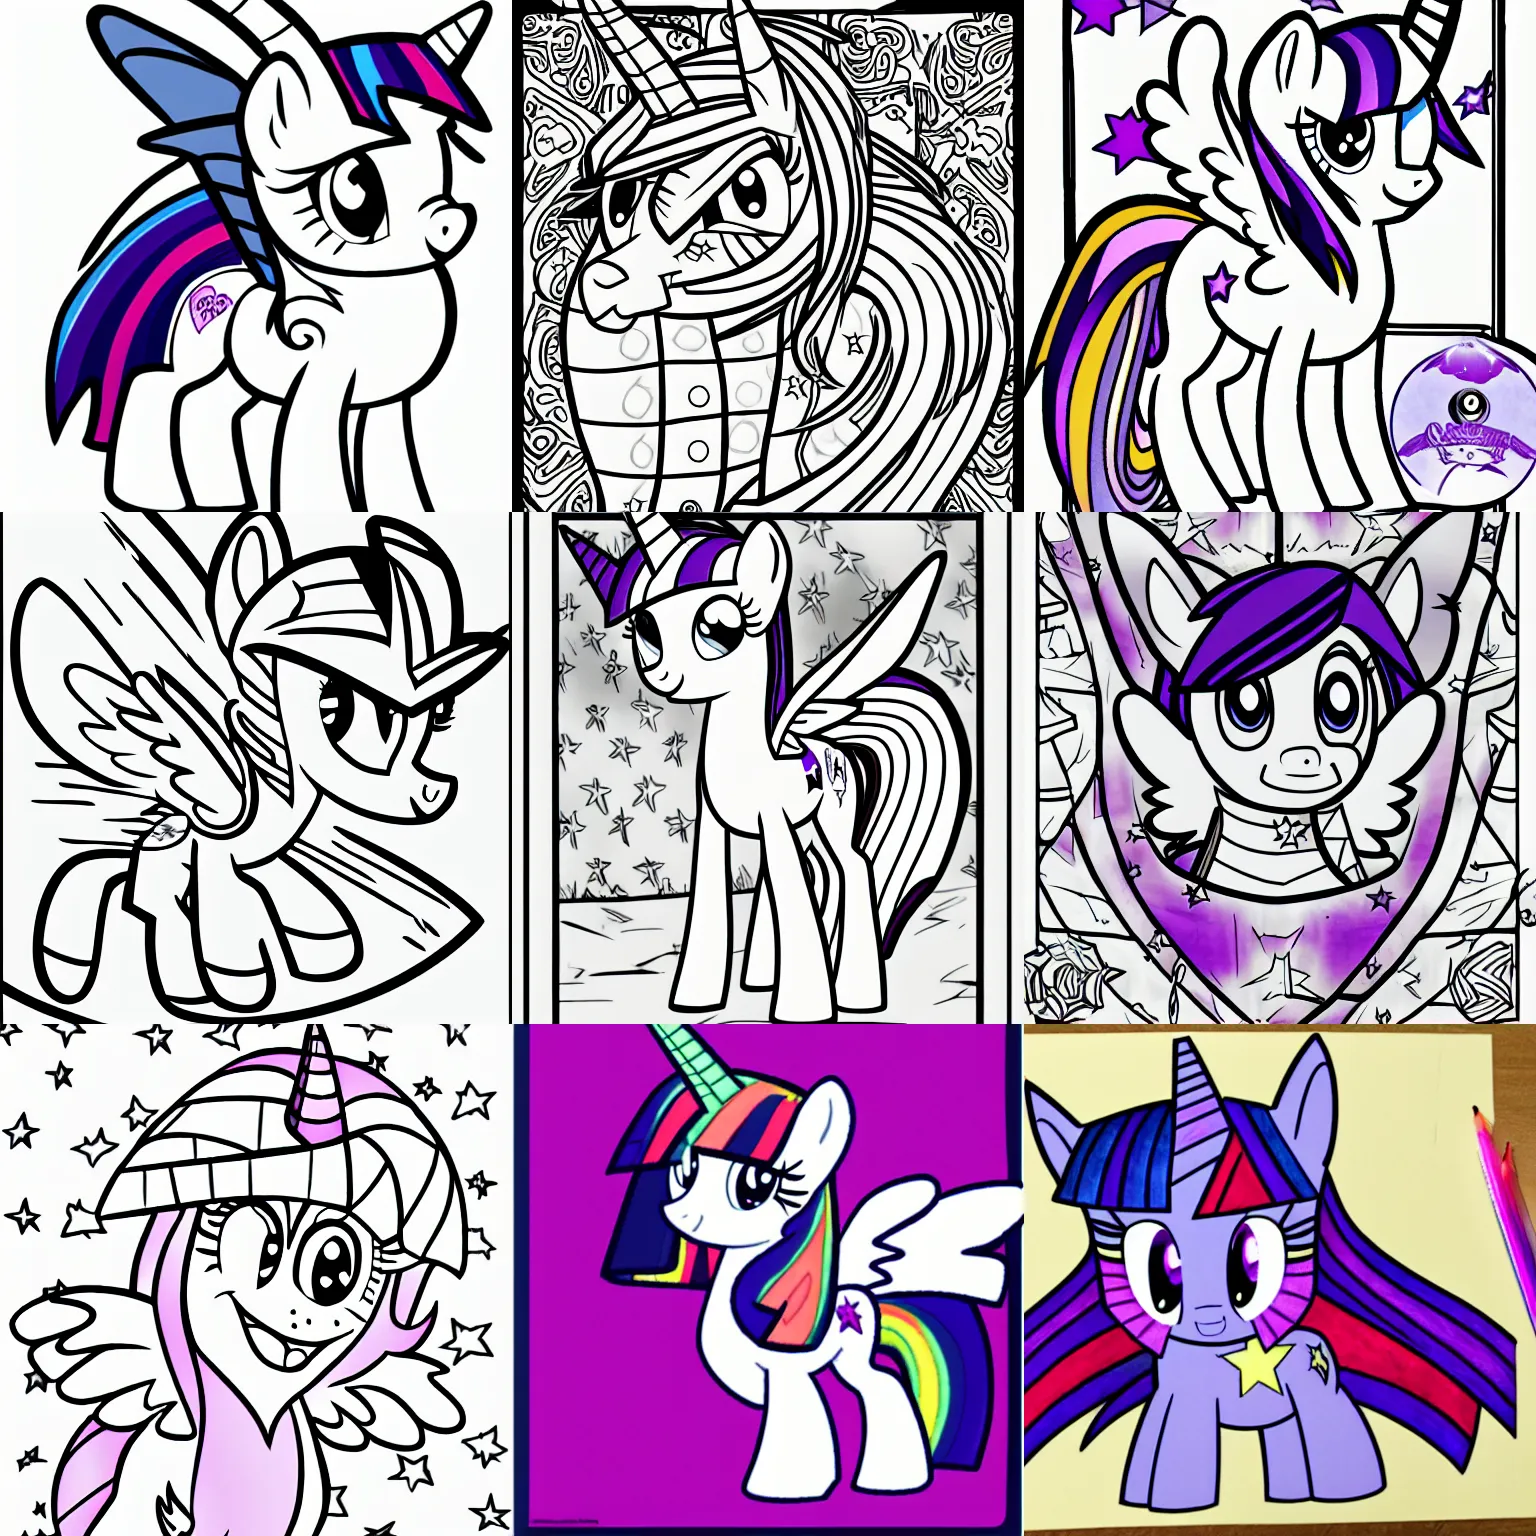 Prompt: Twilight Sparkle, page from a coloring book